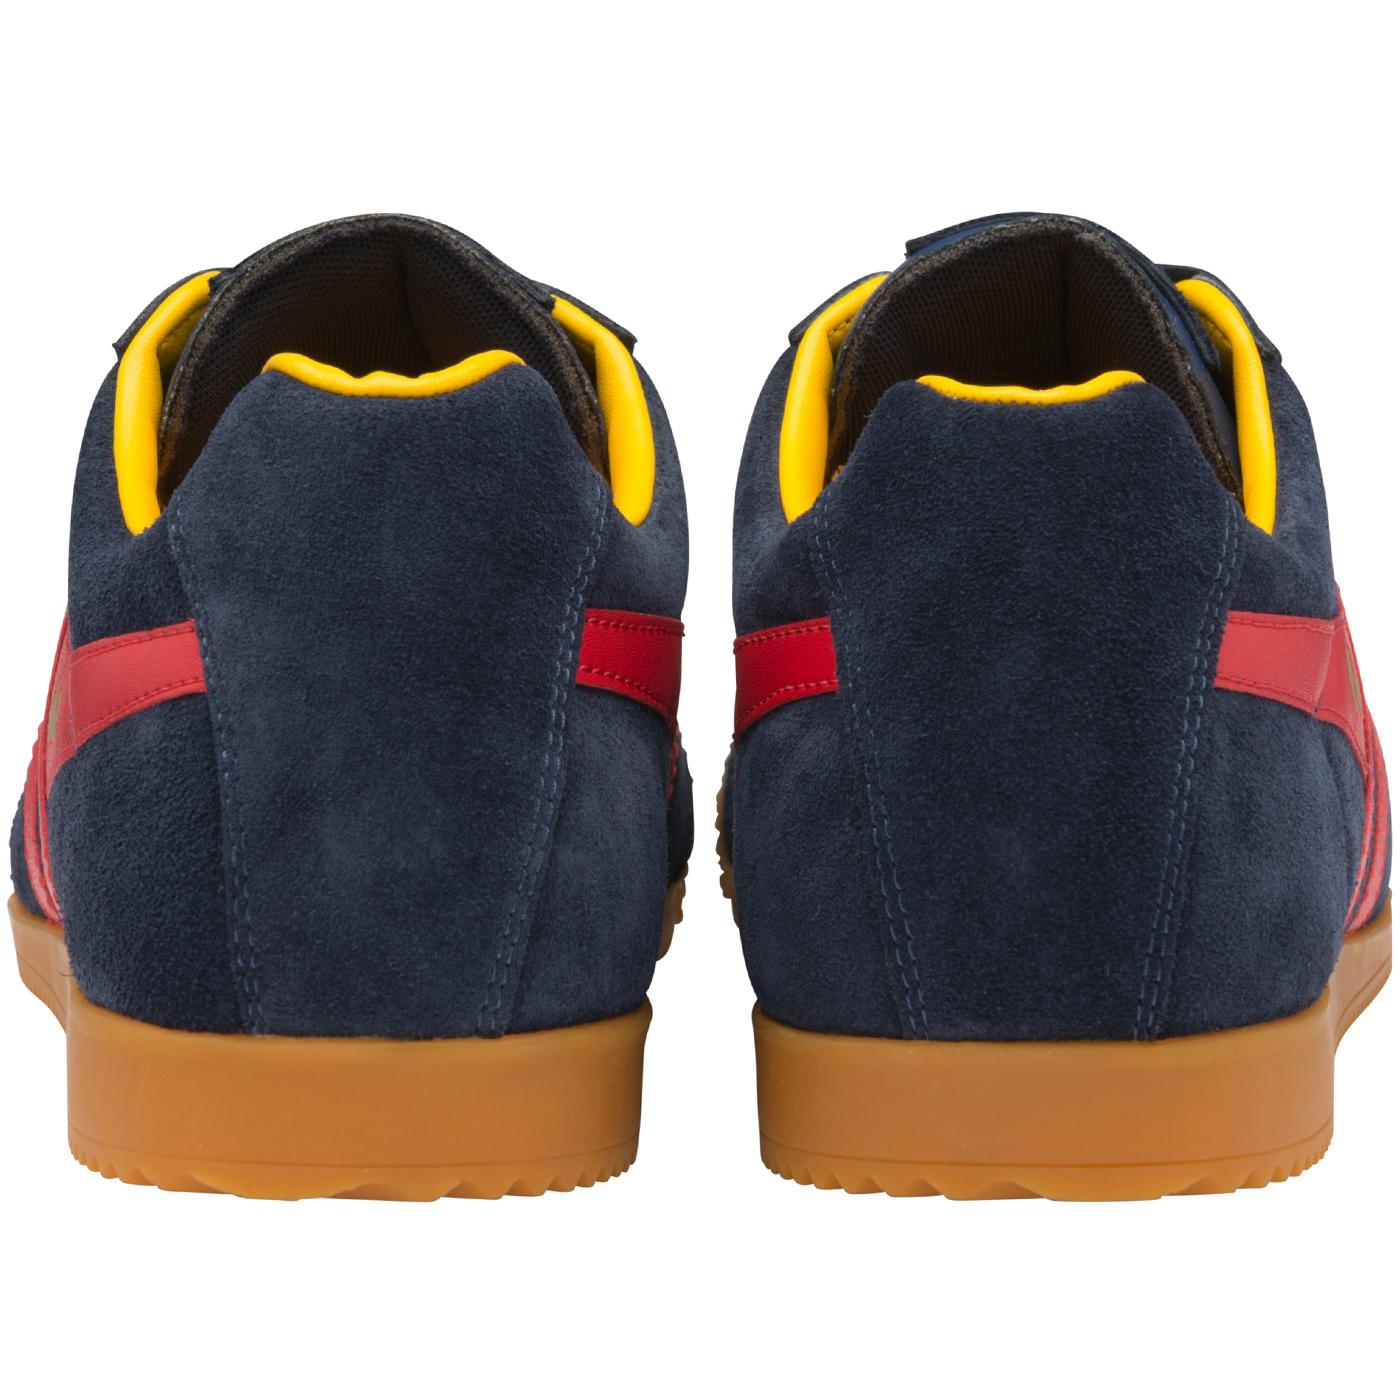 GOLA Harrier Suede Mens Retro 70s Trainers Navy/Red/Sun